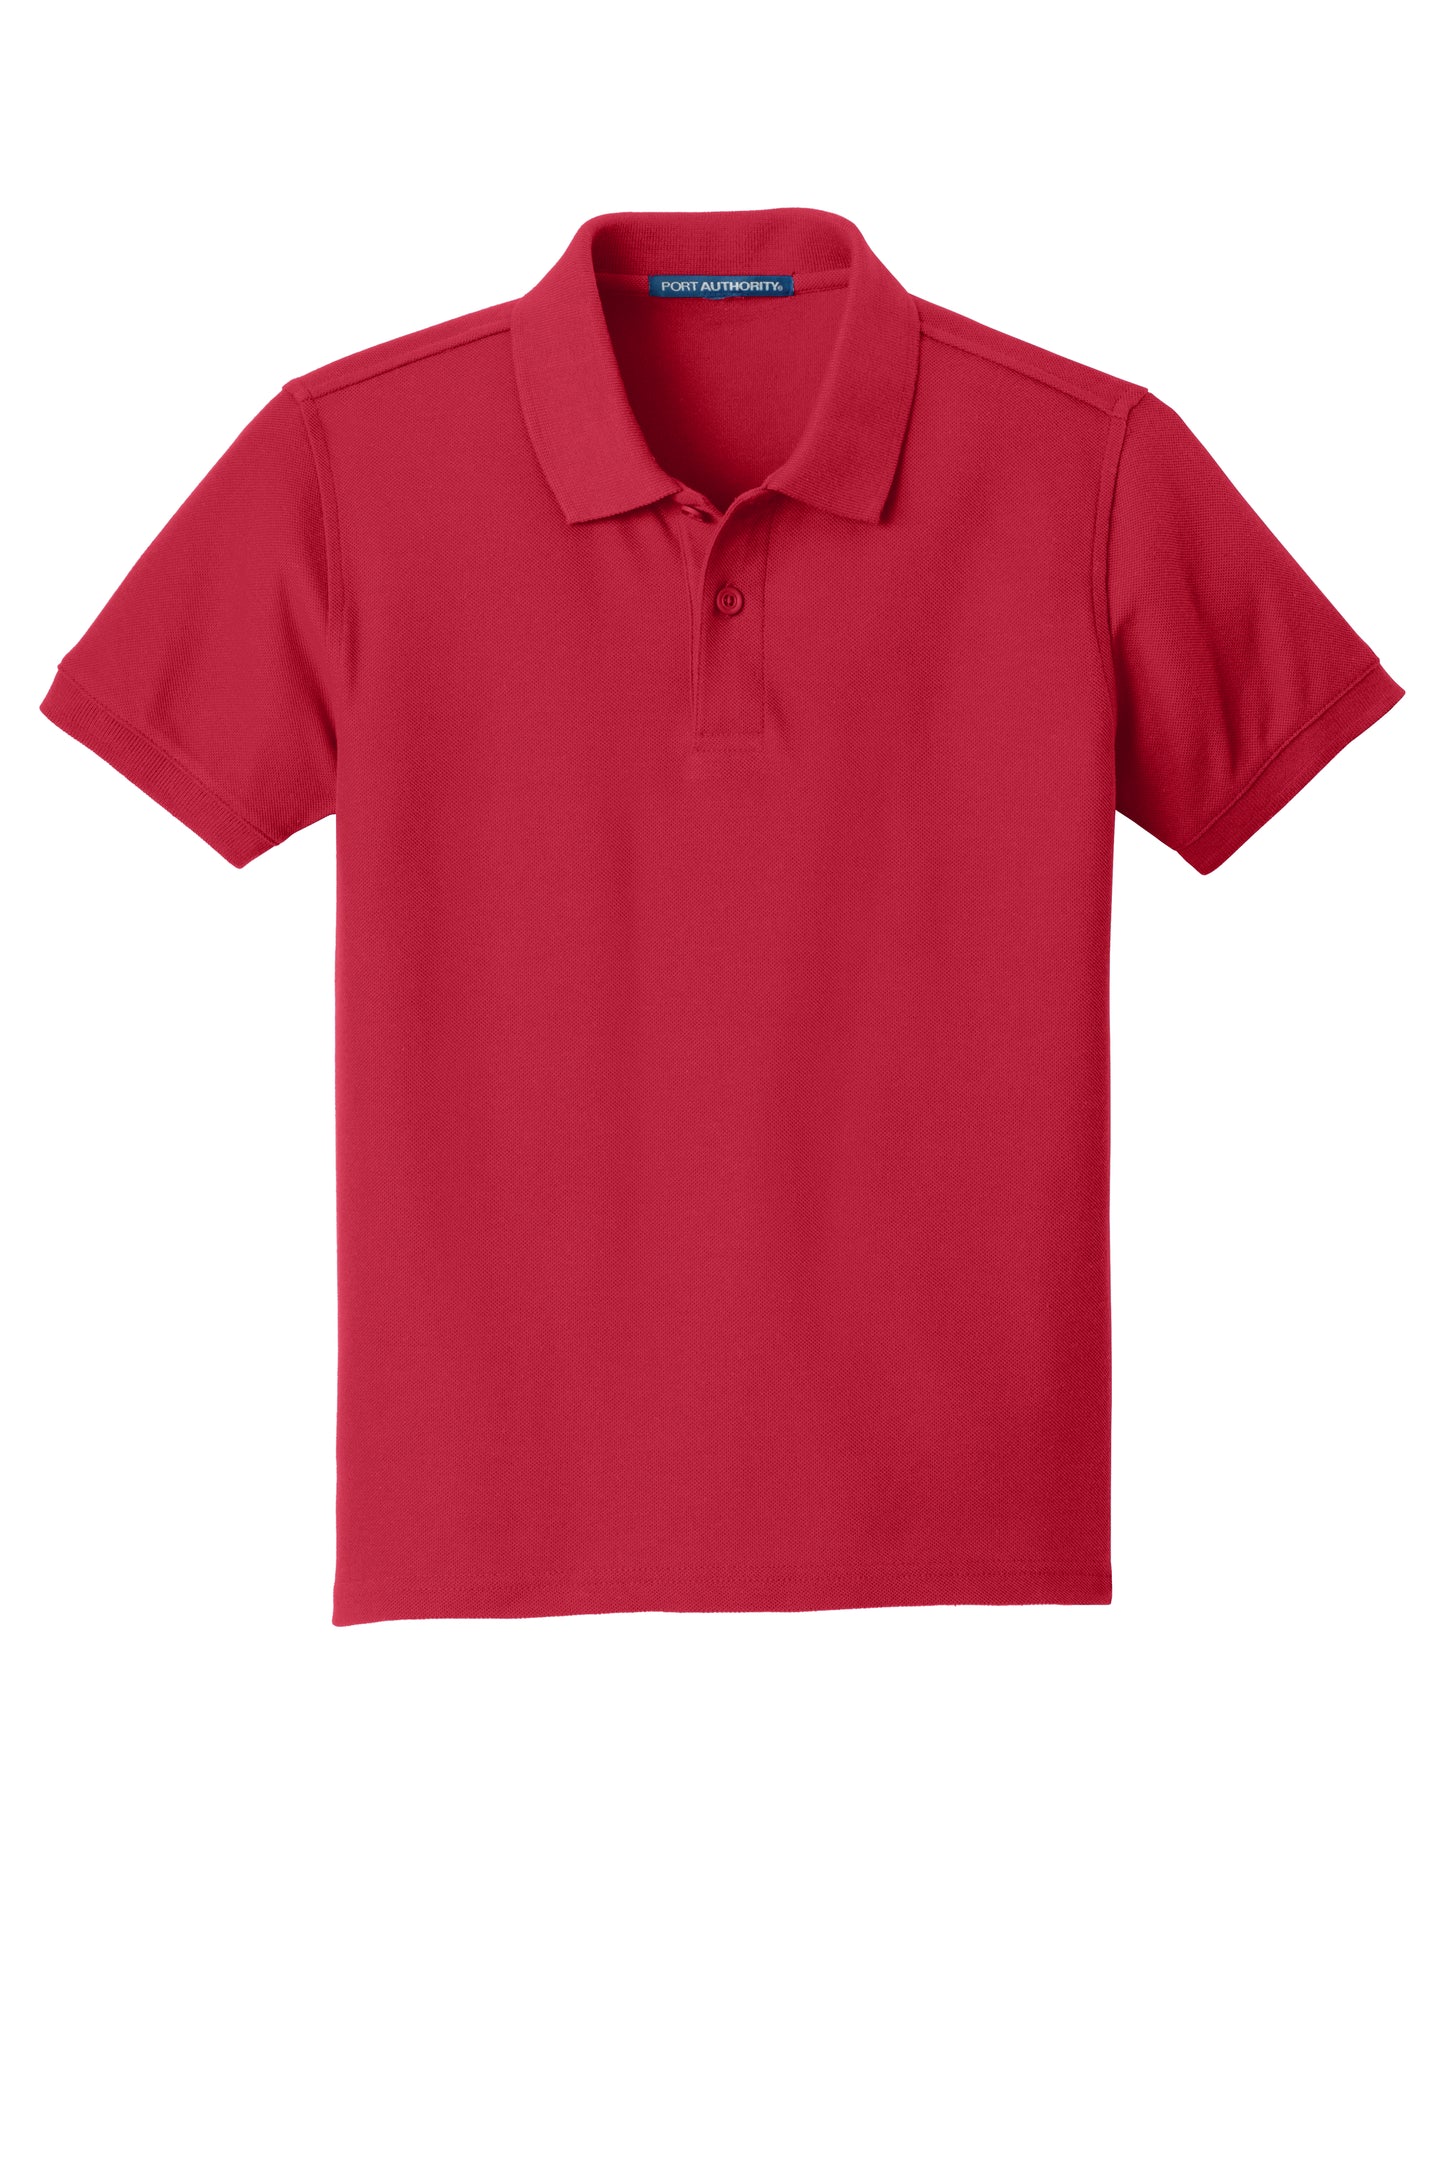 port authority youth core classic pique polo rich red